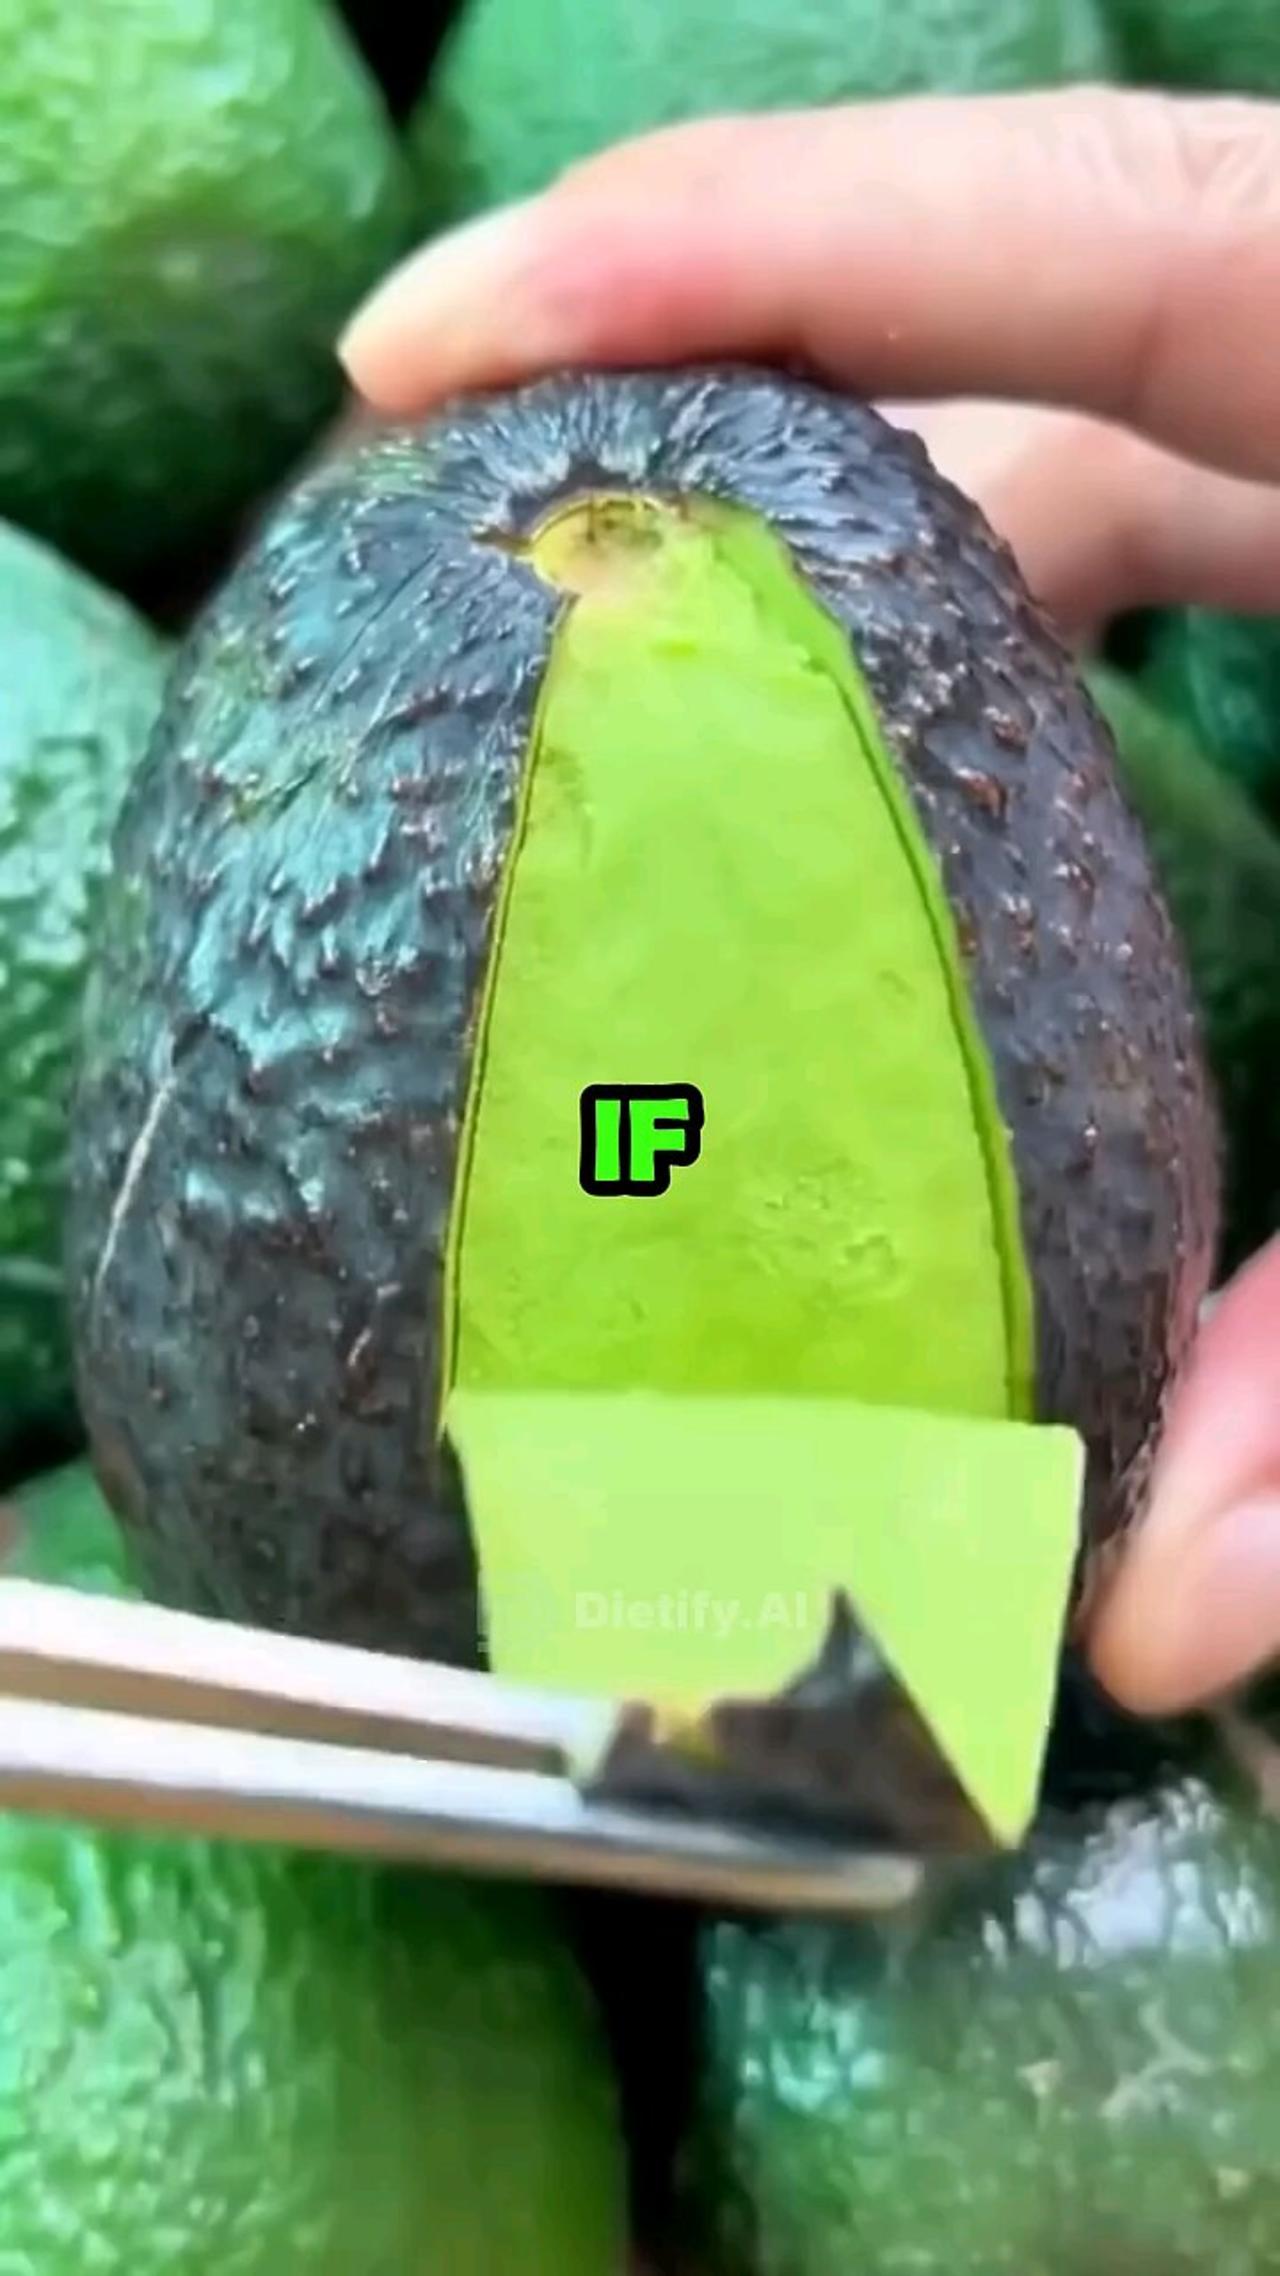 If you eat Avocado what will happen?